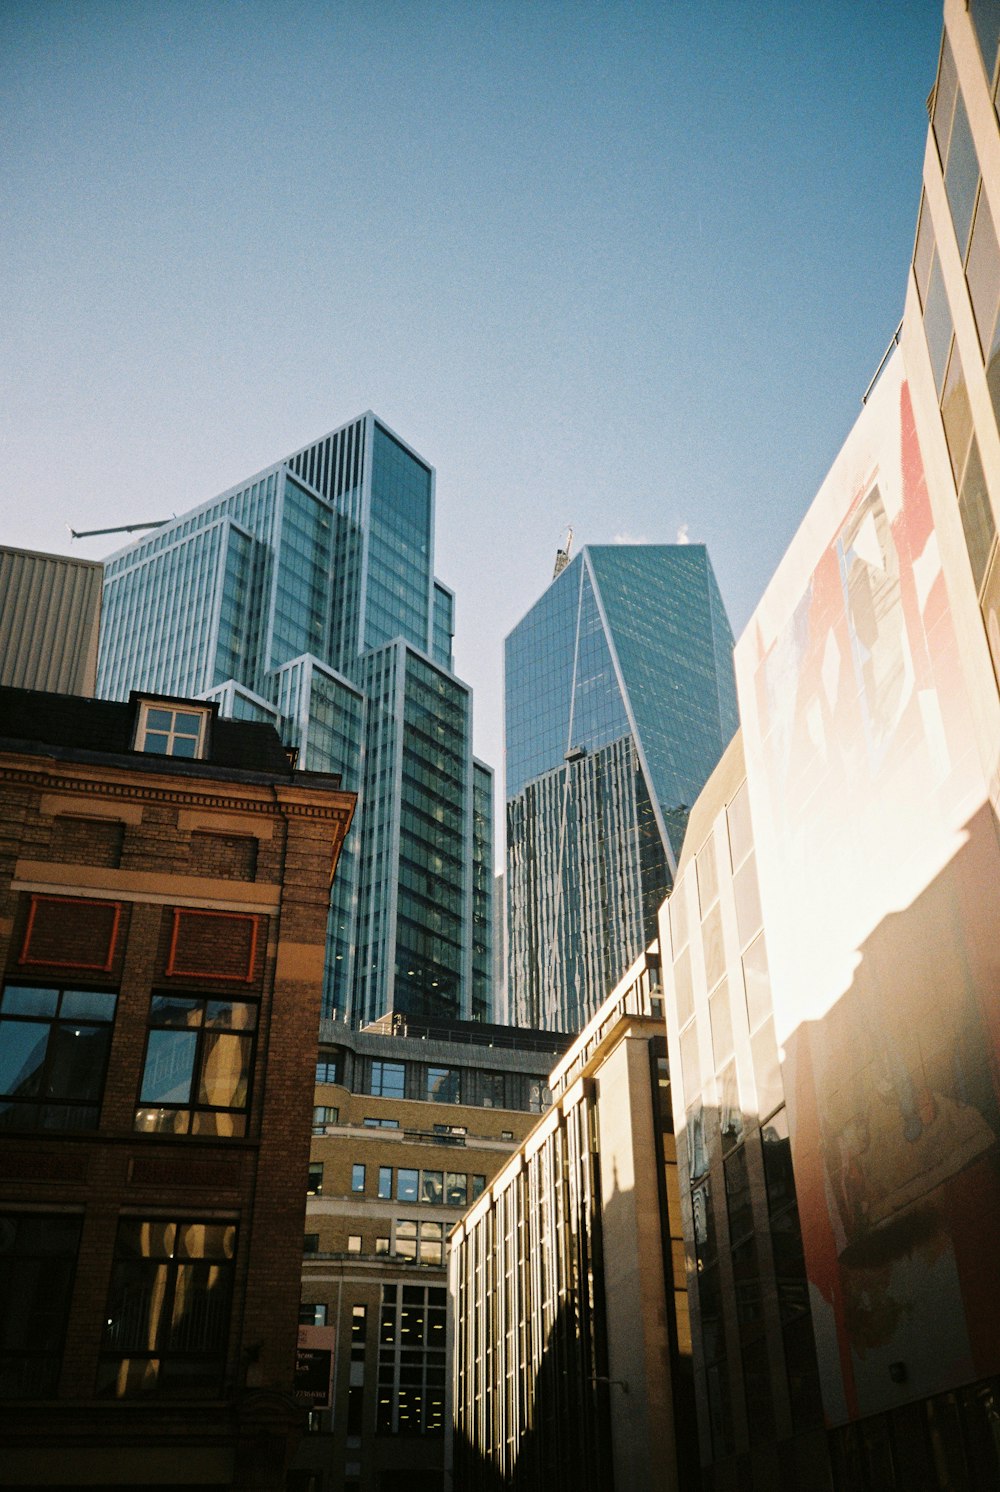 a group of tall buildings in a city